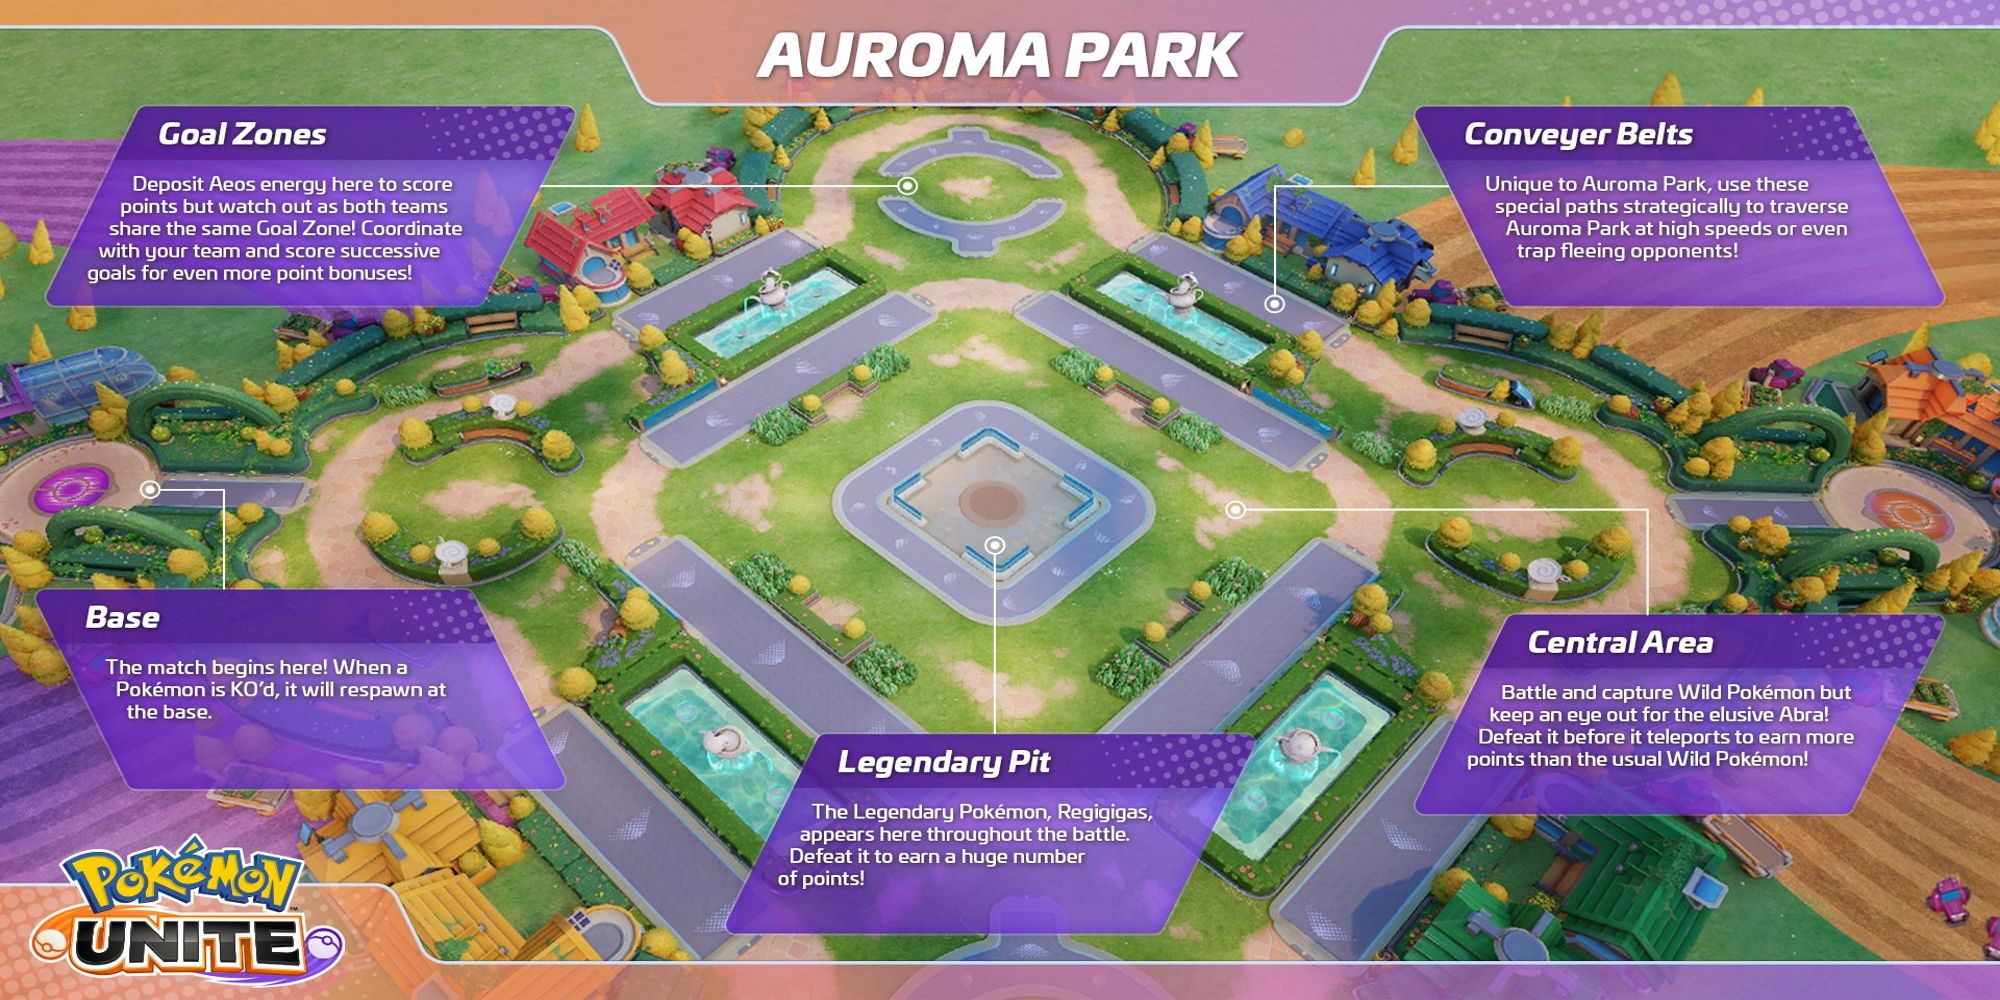 Auroma Park map and labels from Pokemon Unite